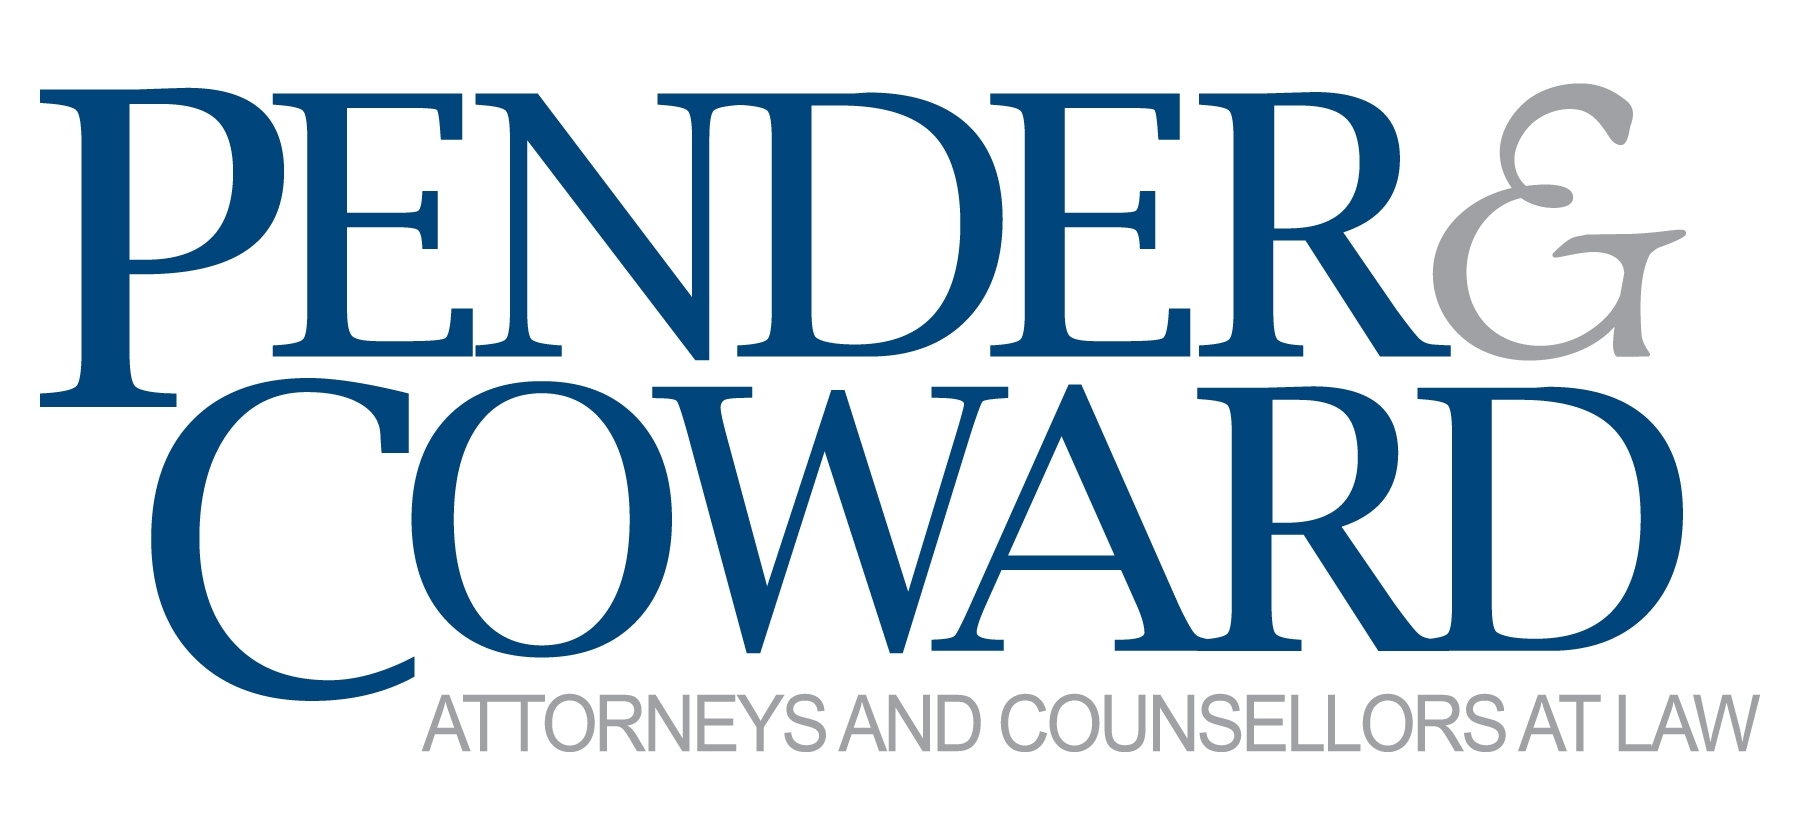 Pender & Coward Attorney Drew Kubovcik Elected to Virginia State Bar Council